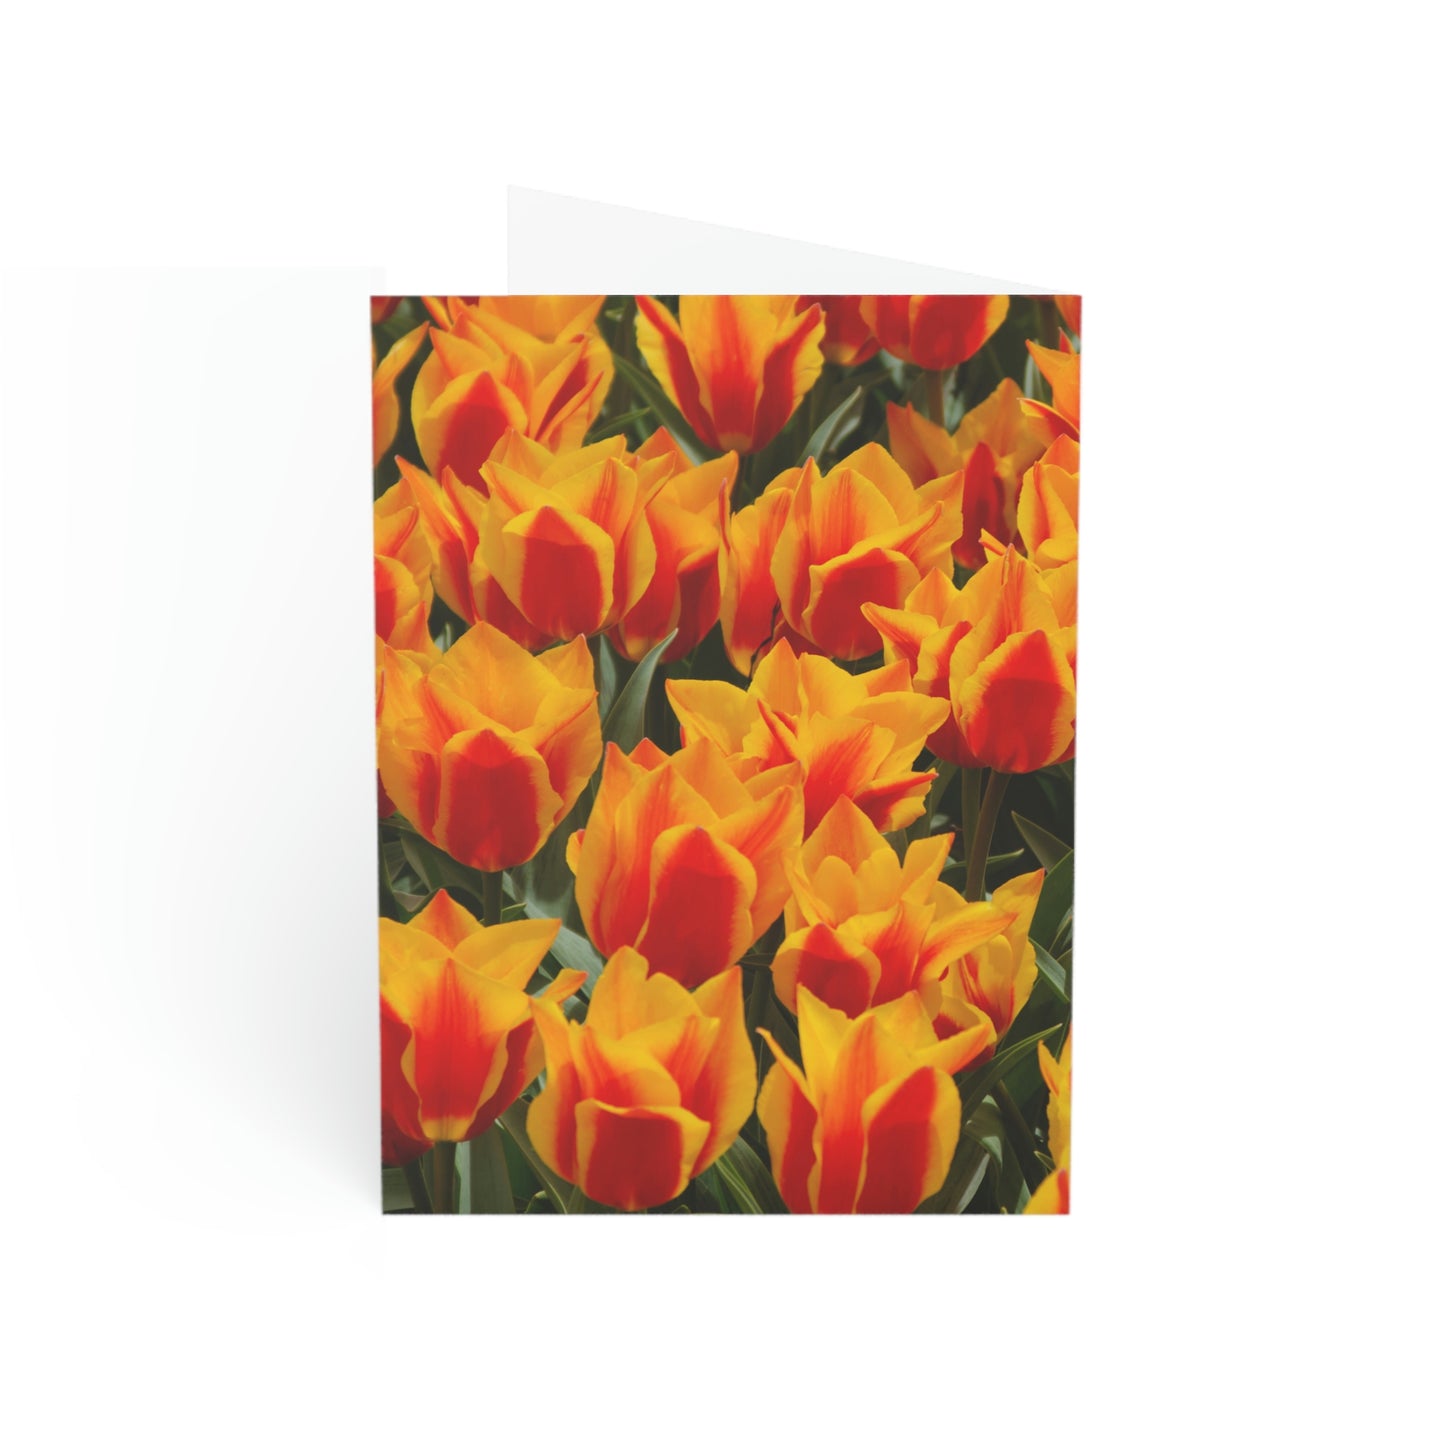 Flowers 18 Greeting Cards (1, 10, 30, and 50pcs)